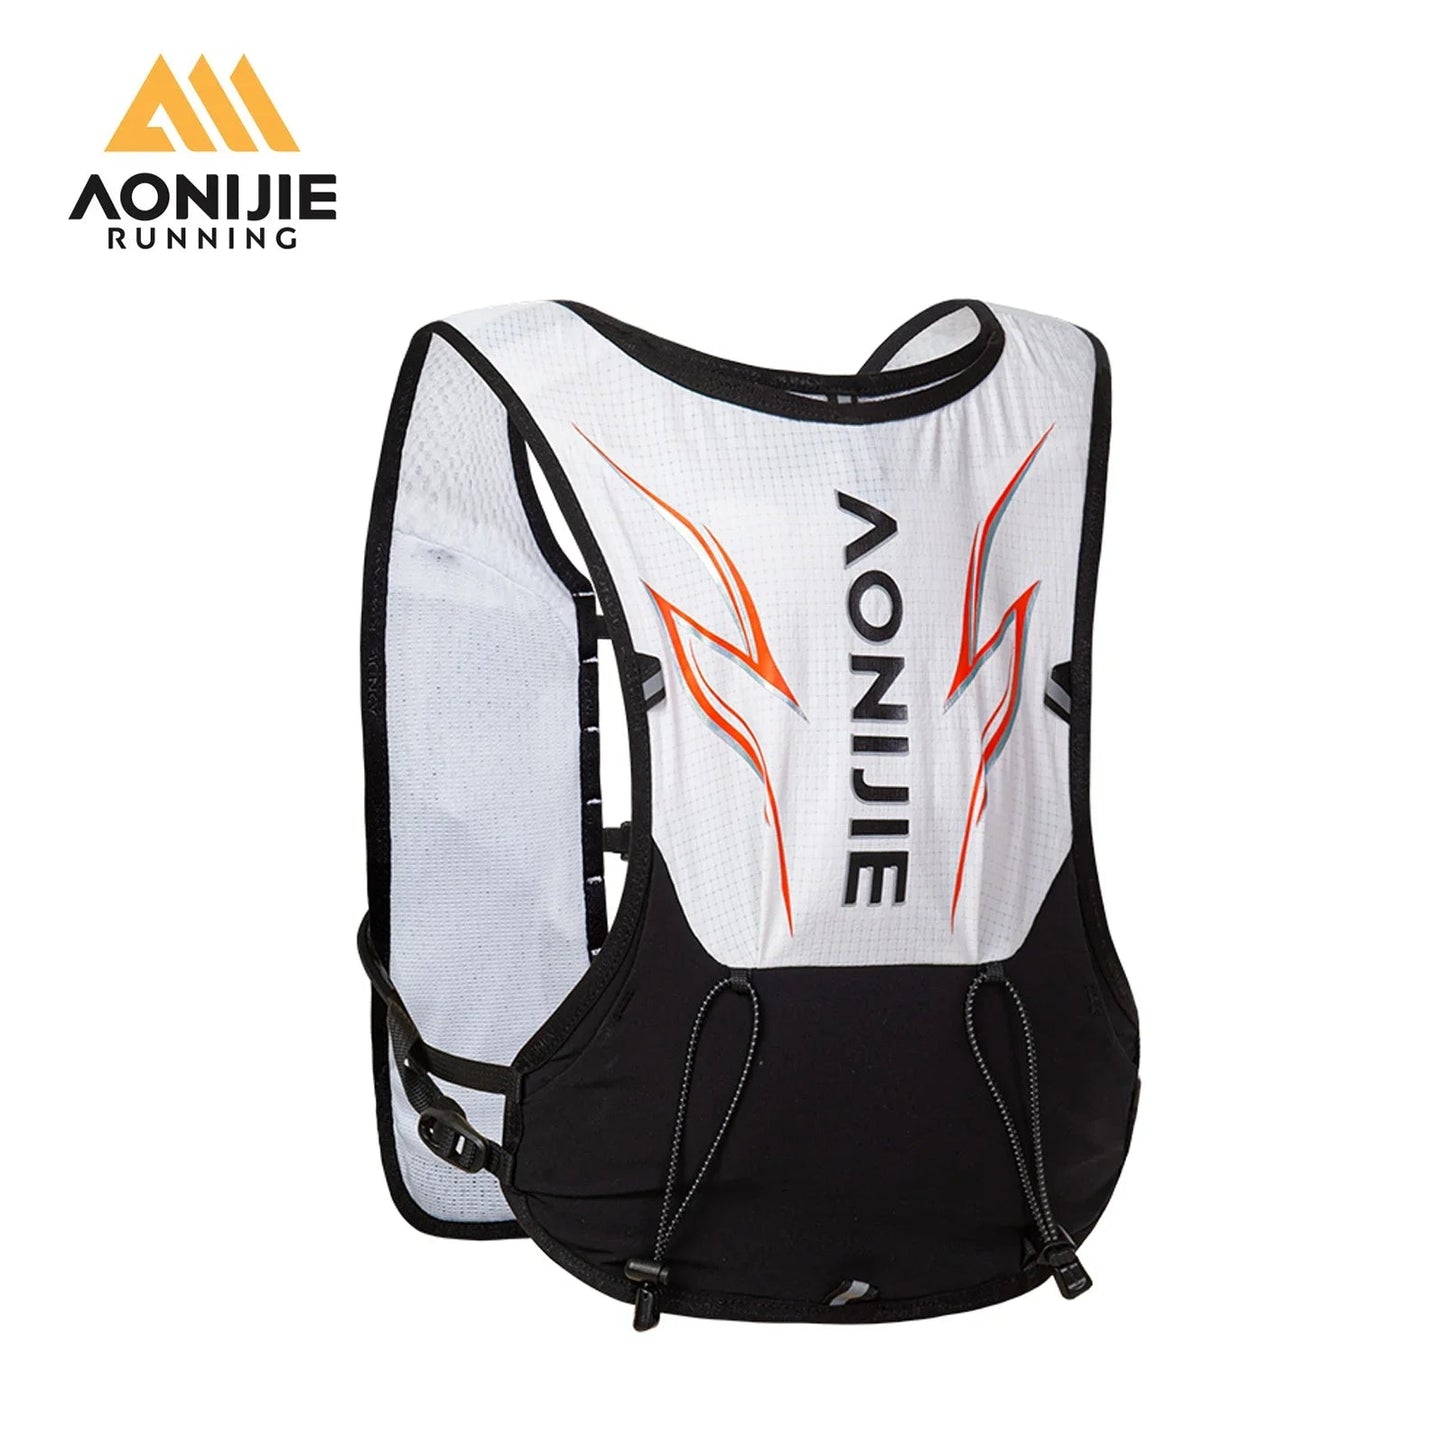 AONIJIE 5L Kids Hydration Backpack - Outdoor Adventures - C9120